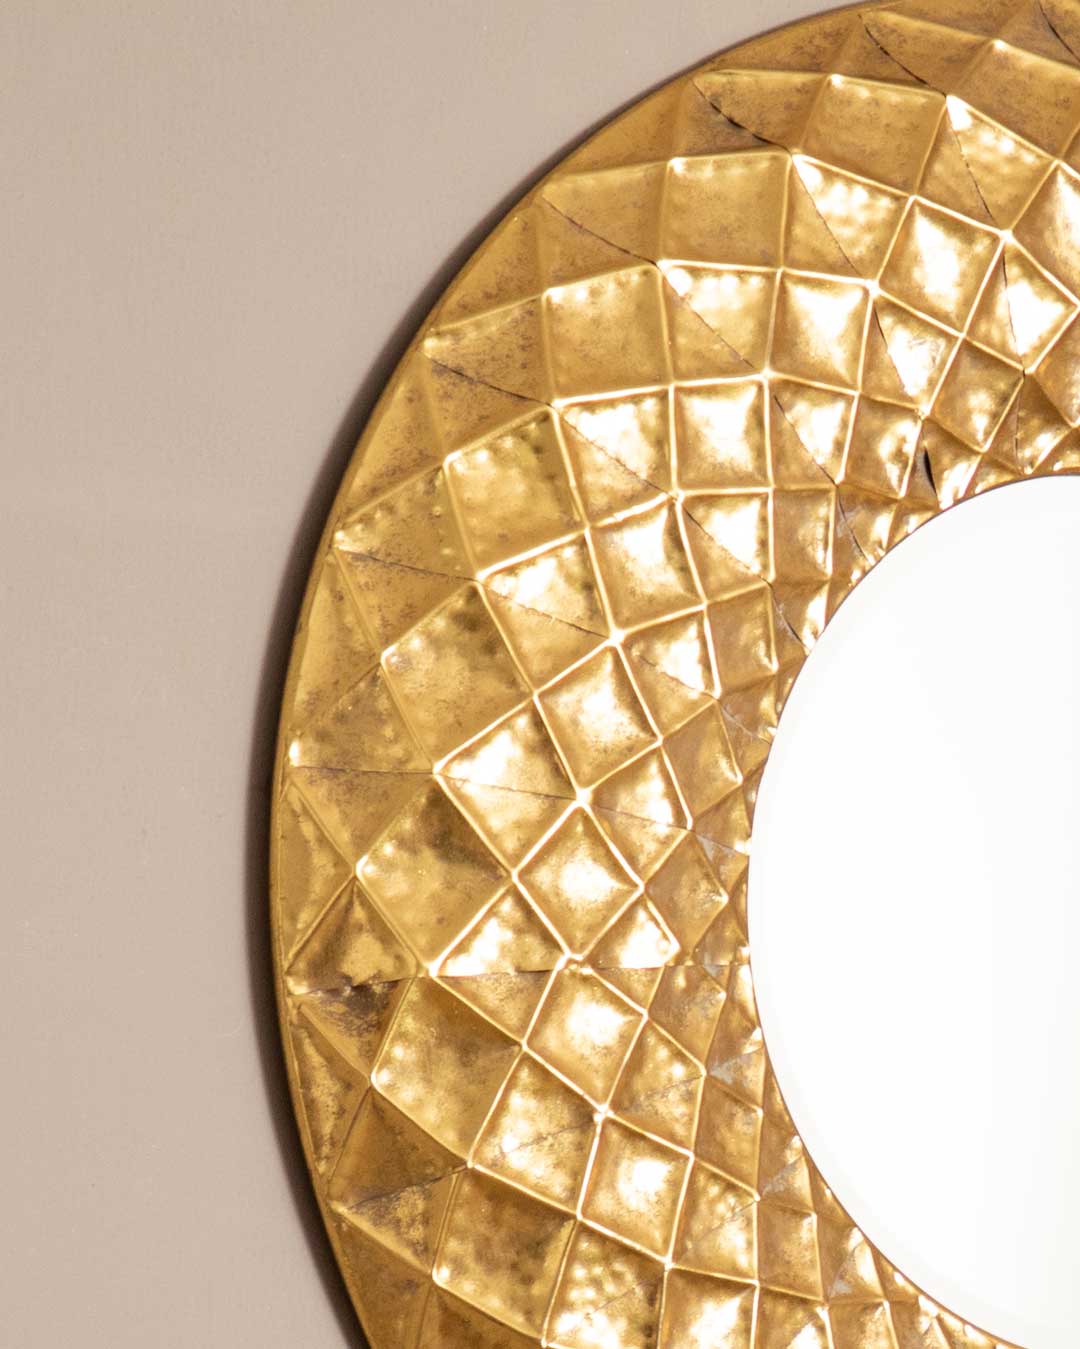 Contemporary Fractal wall mirror with an abstract gold frame in a chic interior.